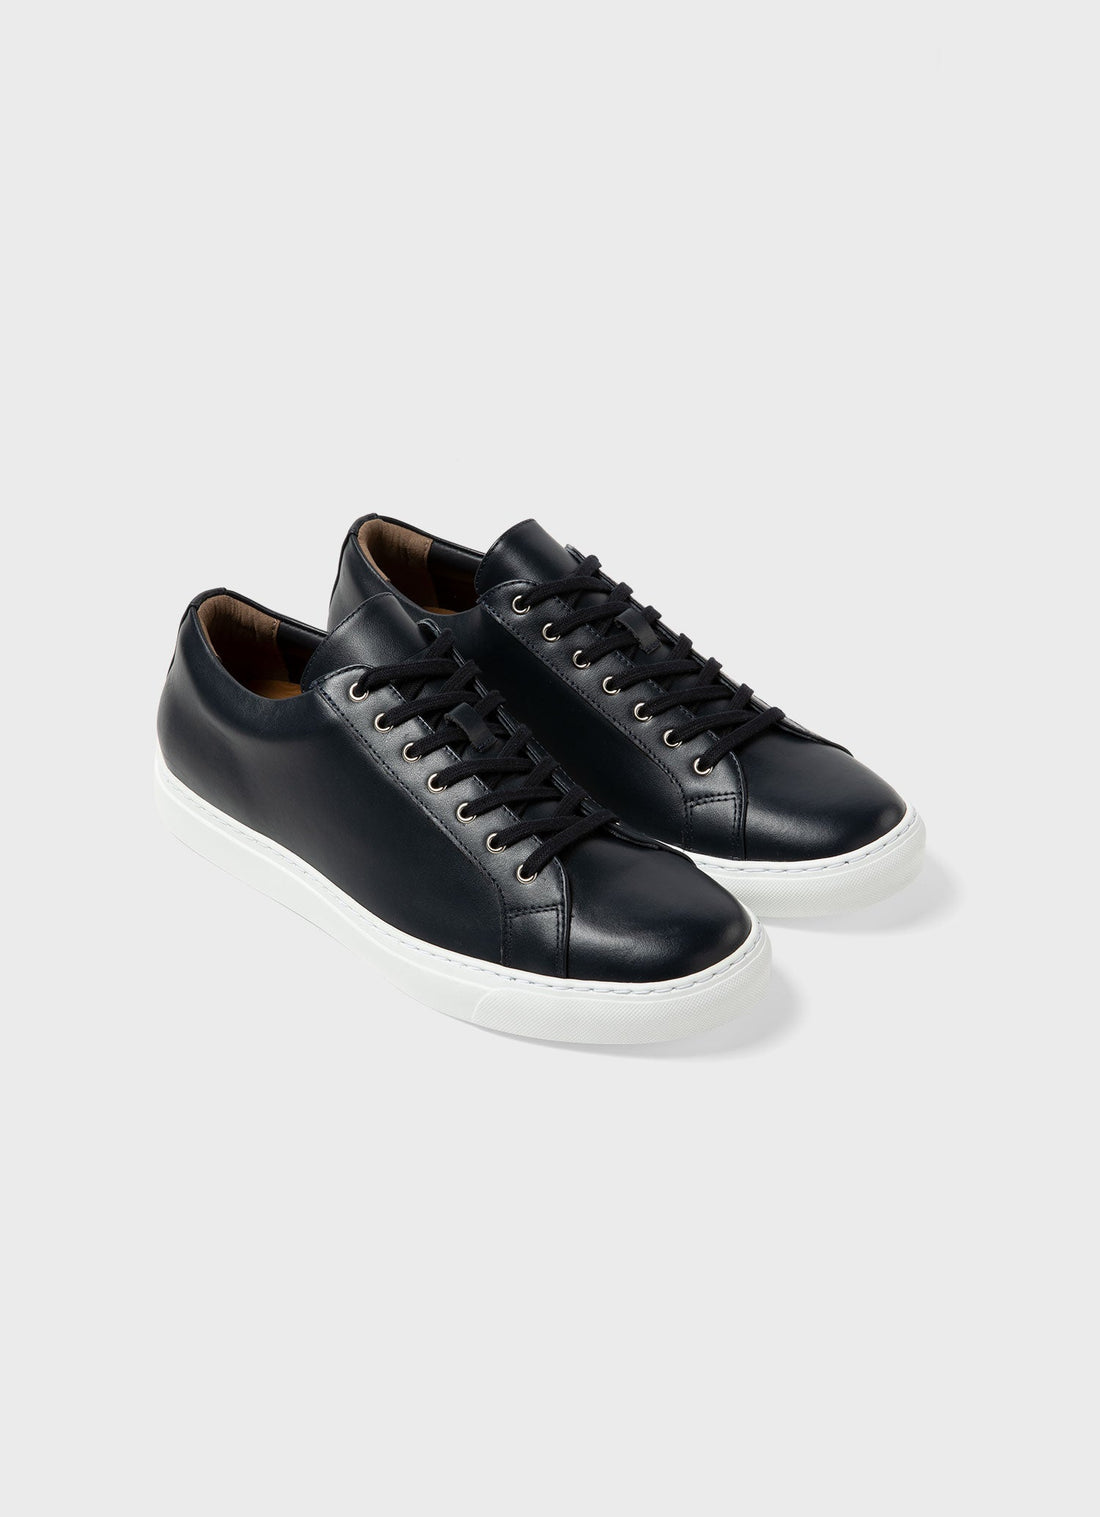 Men's Leather Tennis Shoes in Navy